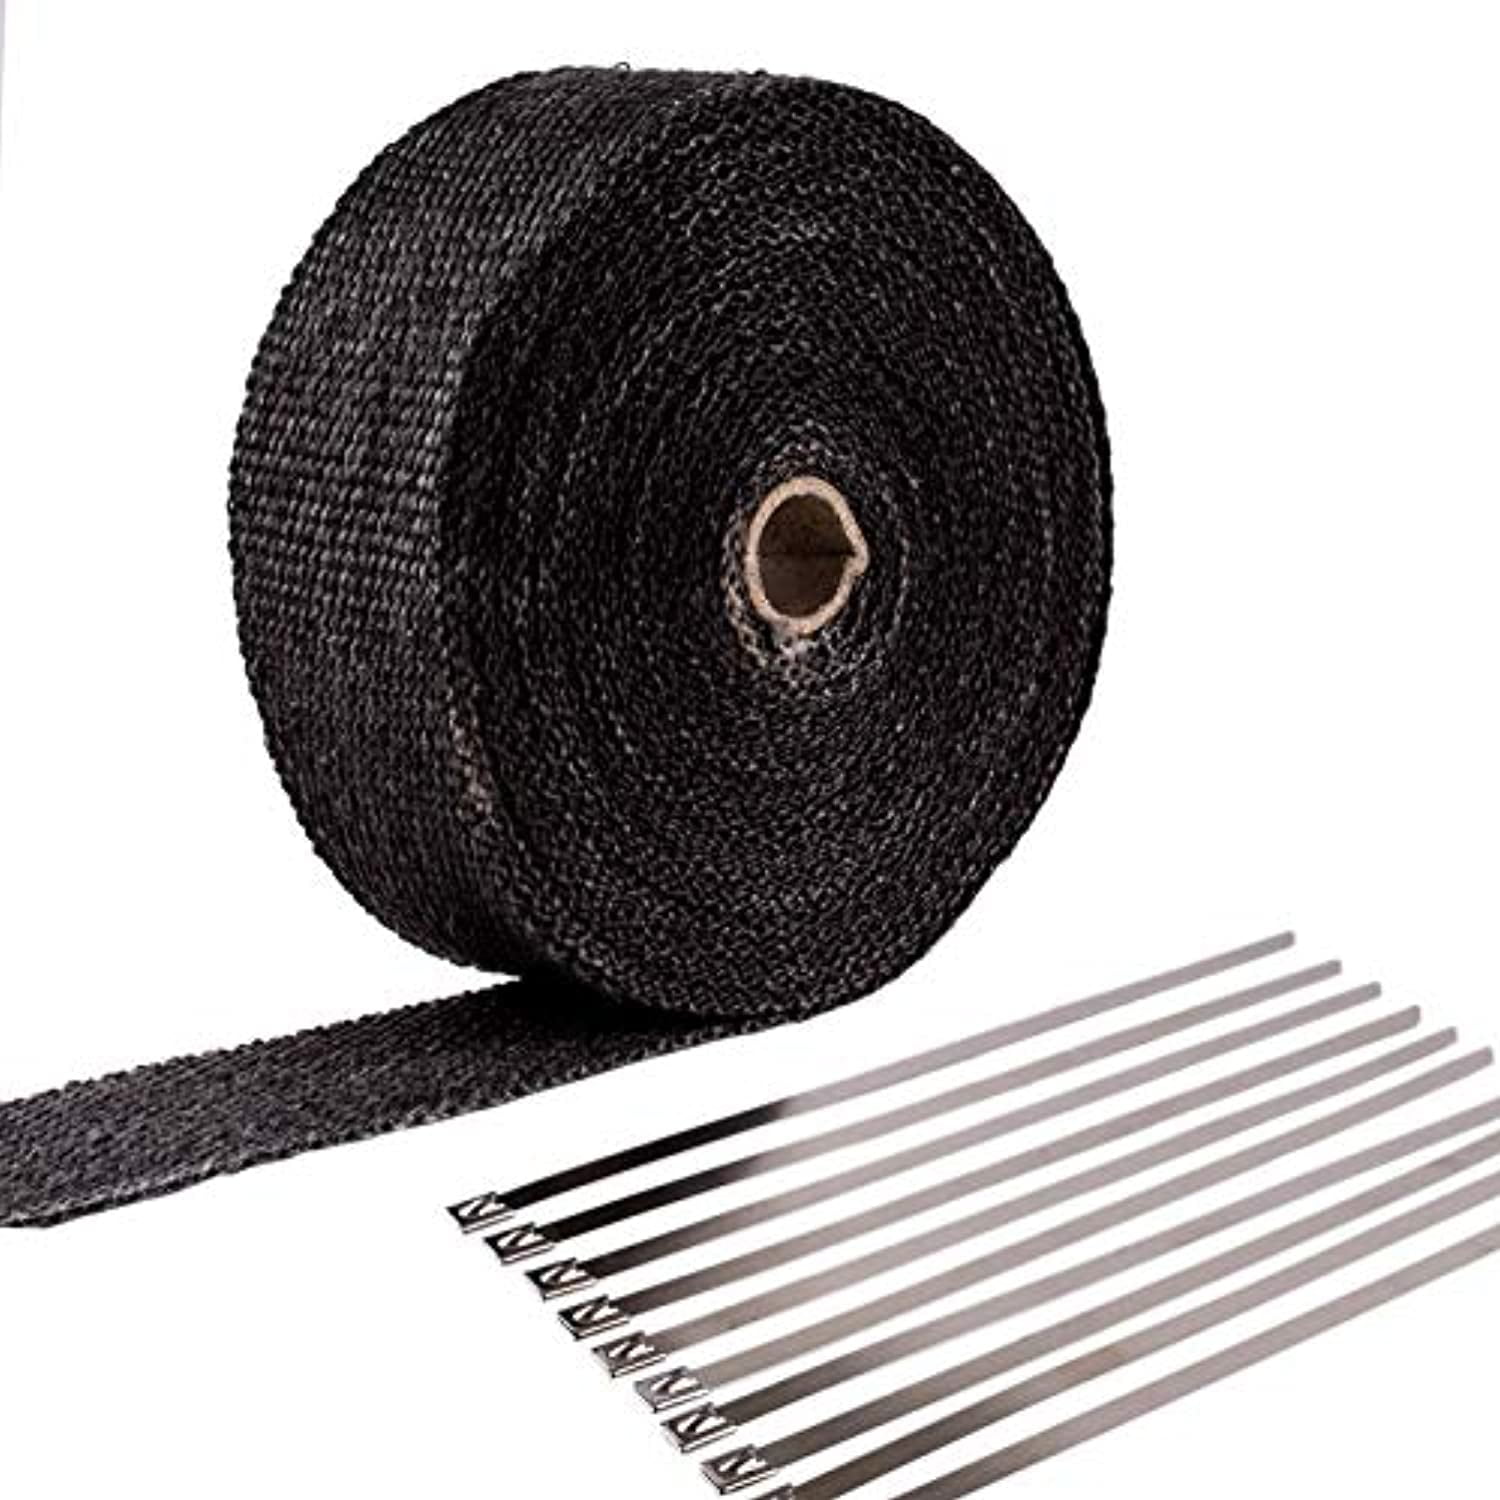 1 Roll MAS 2 x 50 Black Exhaust Heat Wrap Roll for Motorcycle Fiberglass Heat Shield Tape with Stainless Ties 